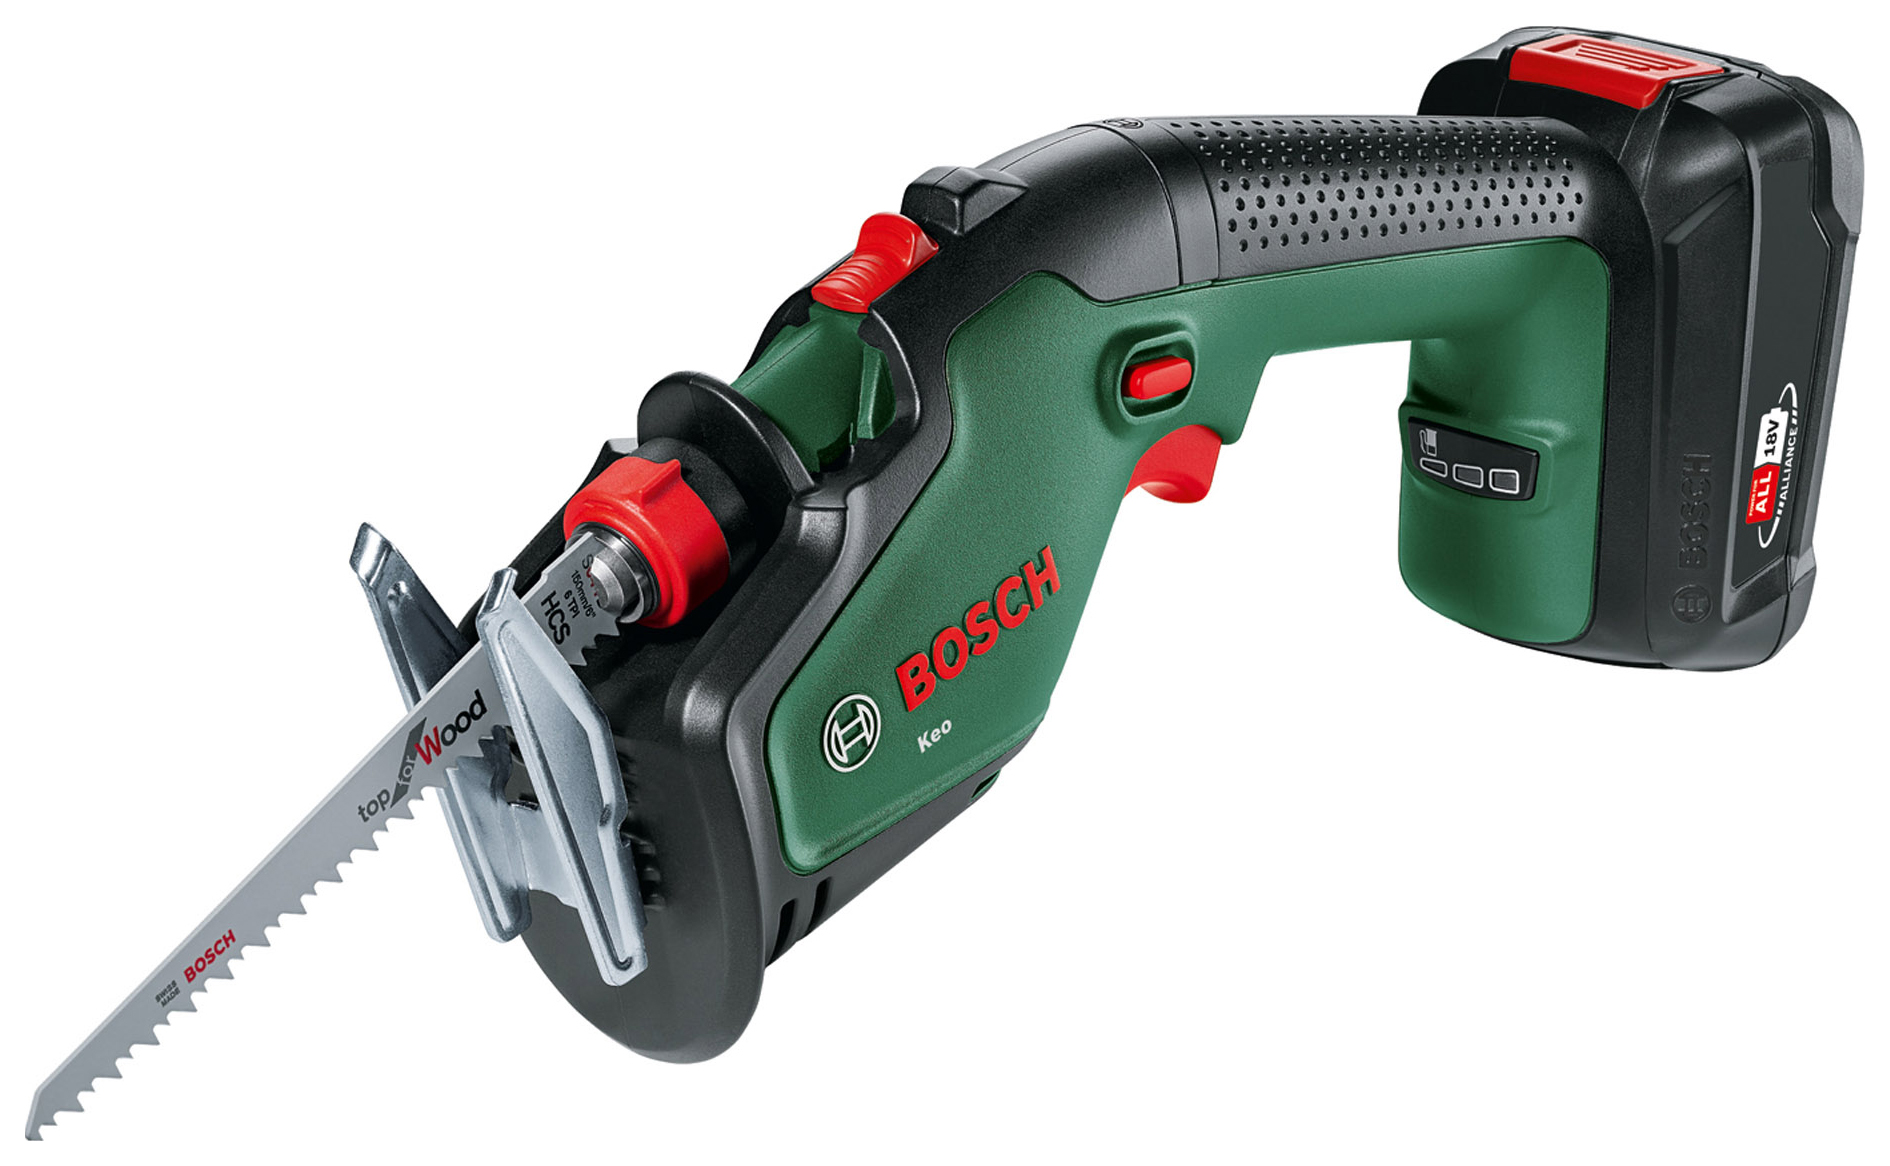 Bosch KEO 18V Cordless Garden Saw with 1 x 2.0Ah Battery